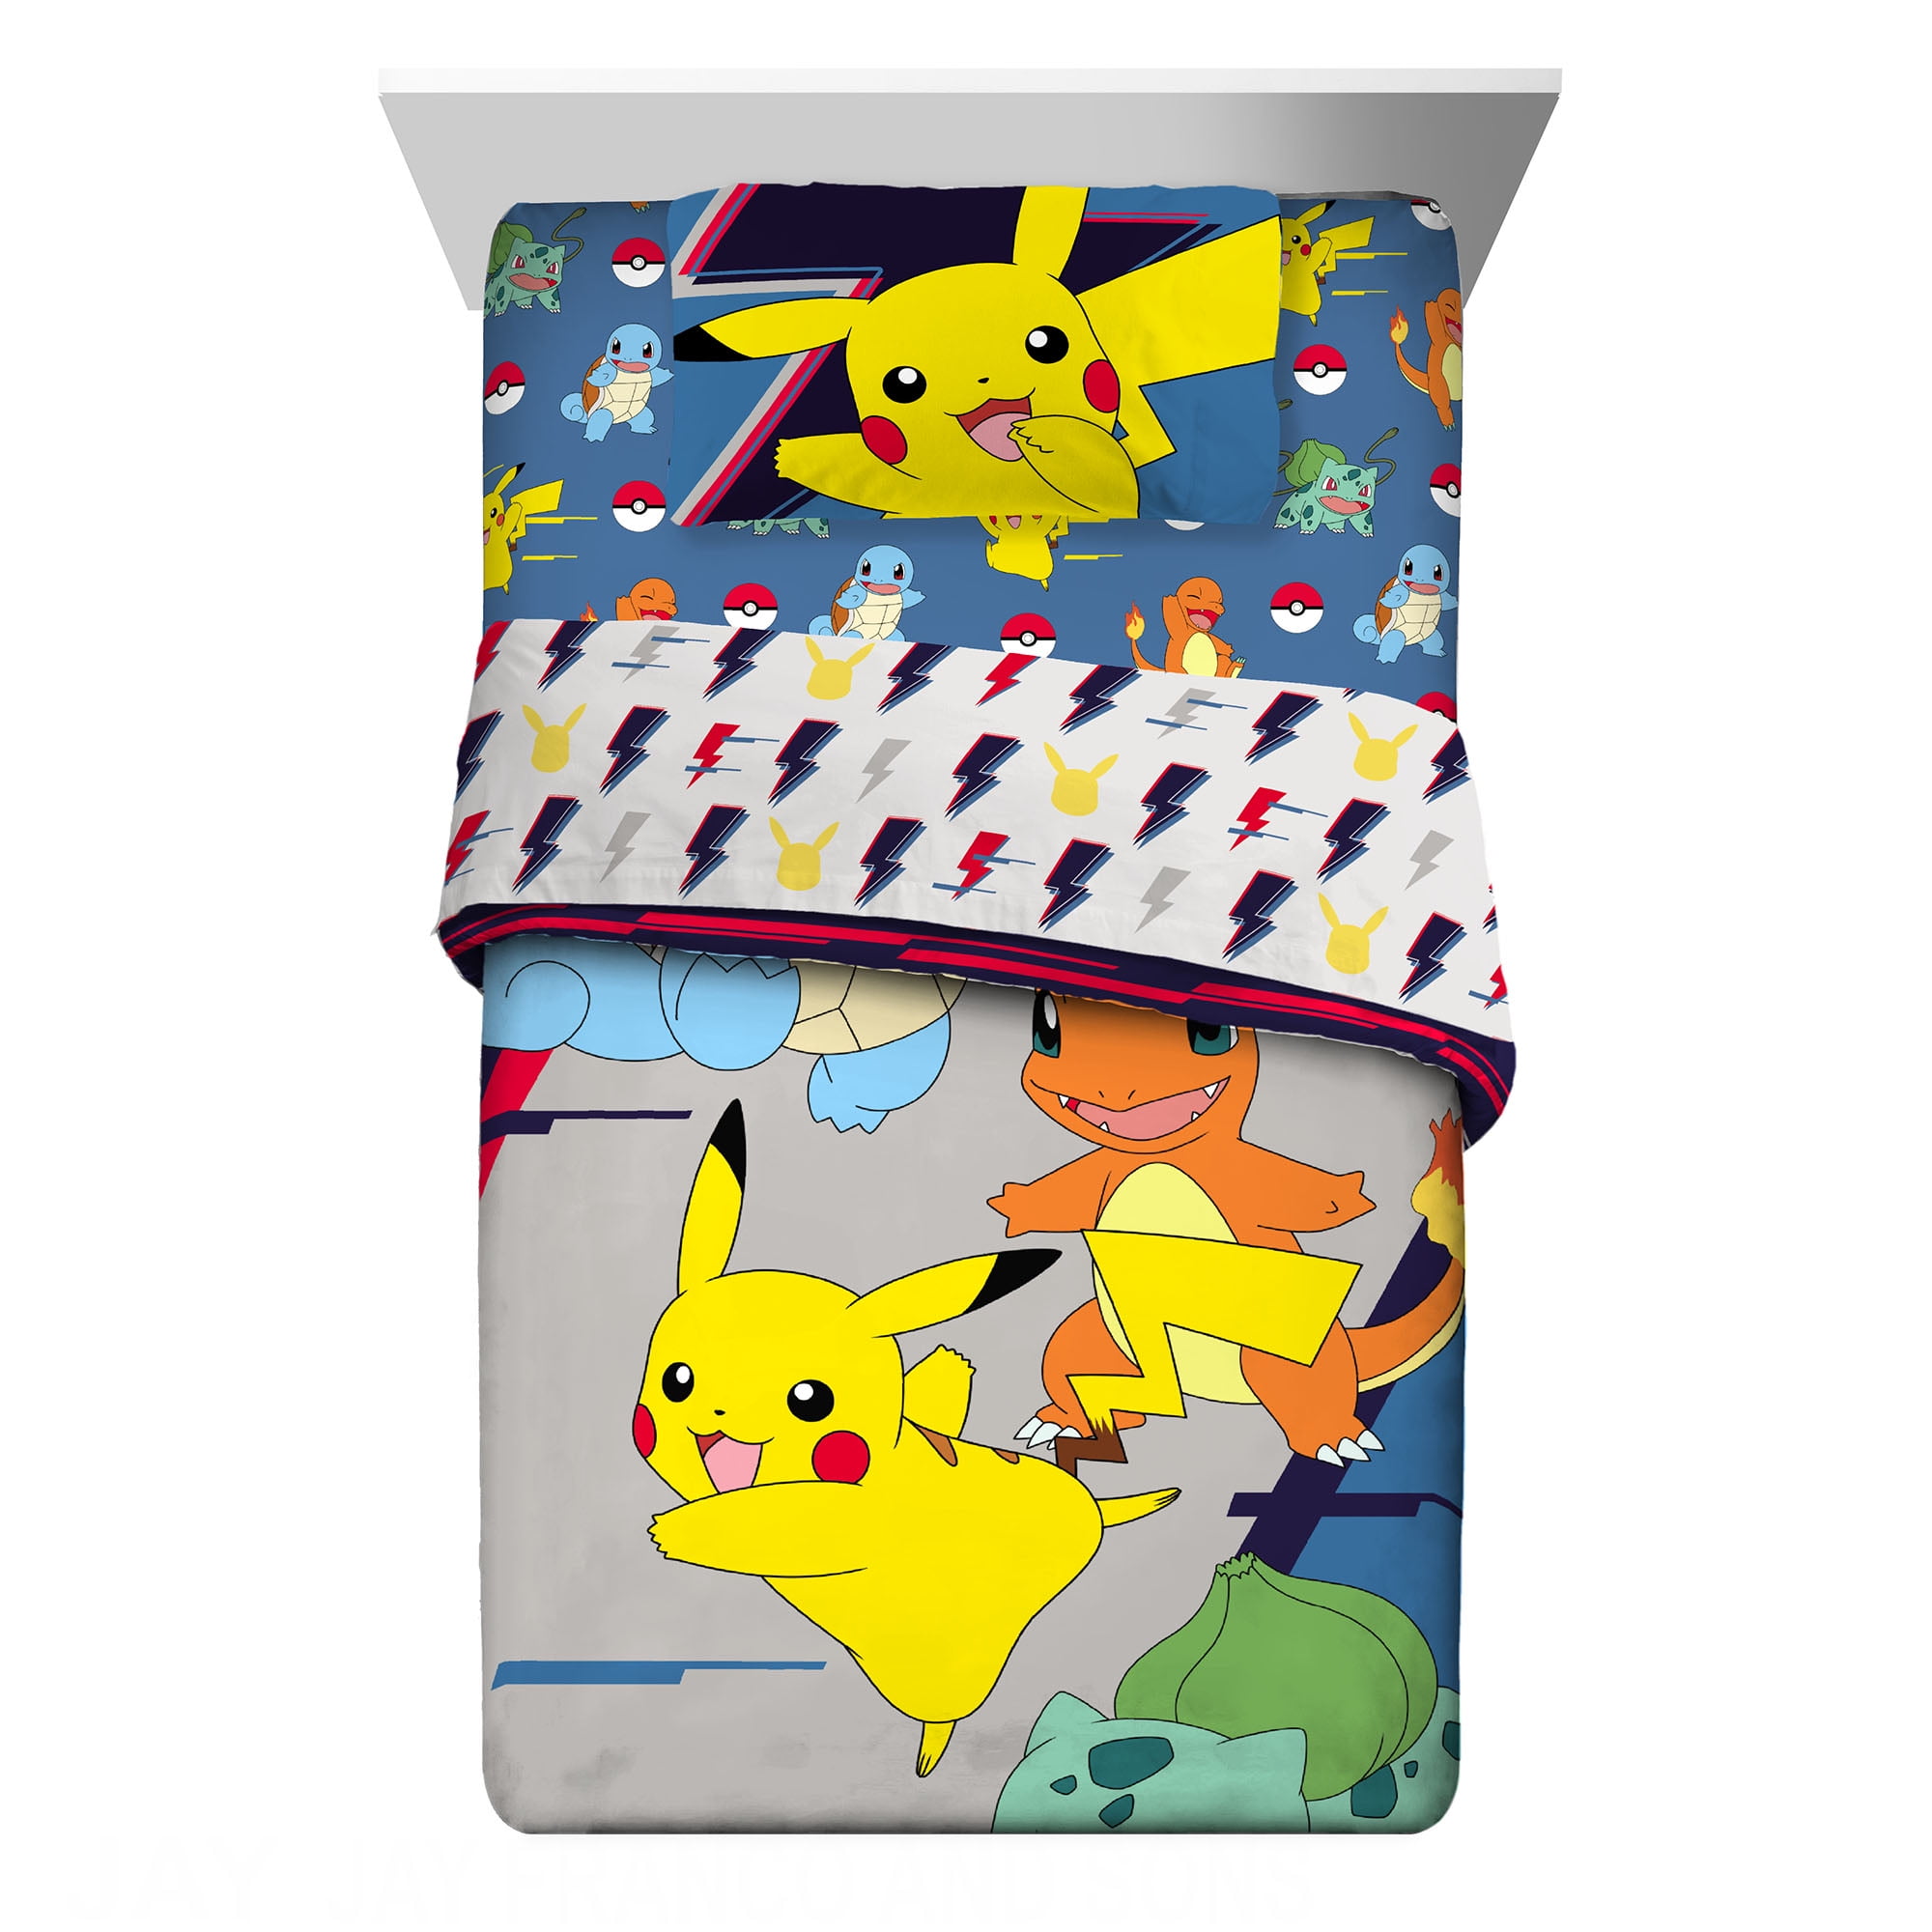 Official Pokemon Catch Kids Bedroom Rug Pokeball Matches Bedding Gift 